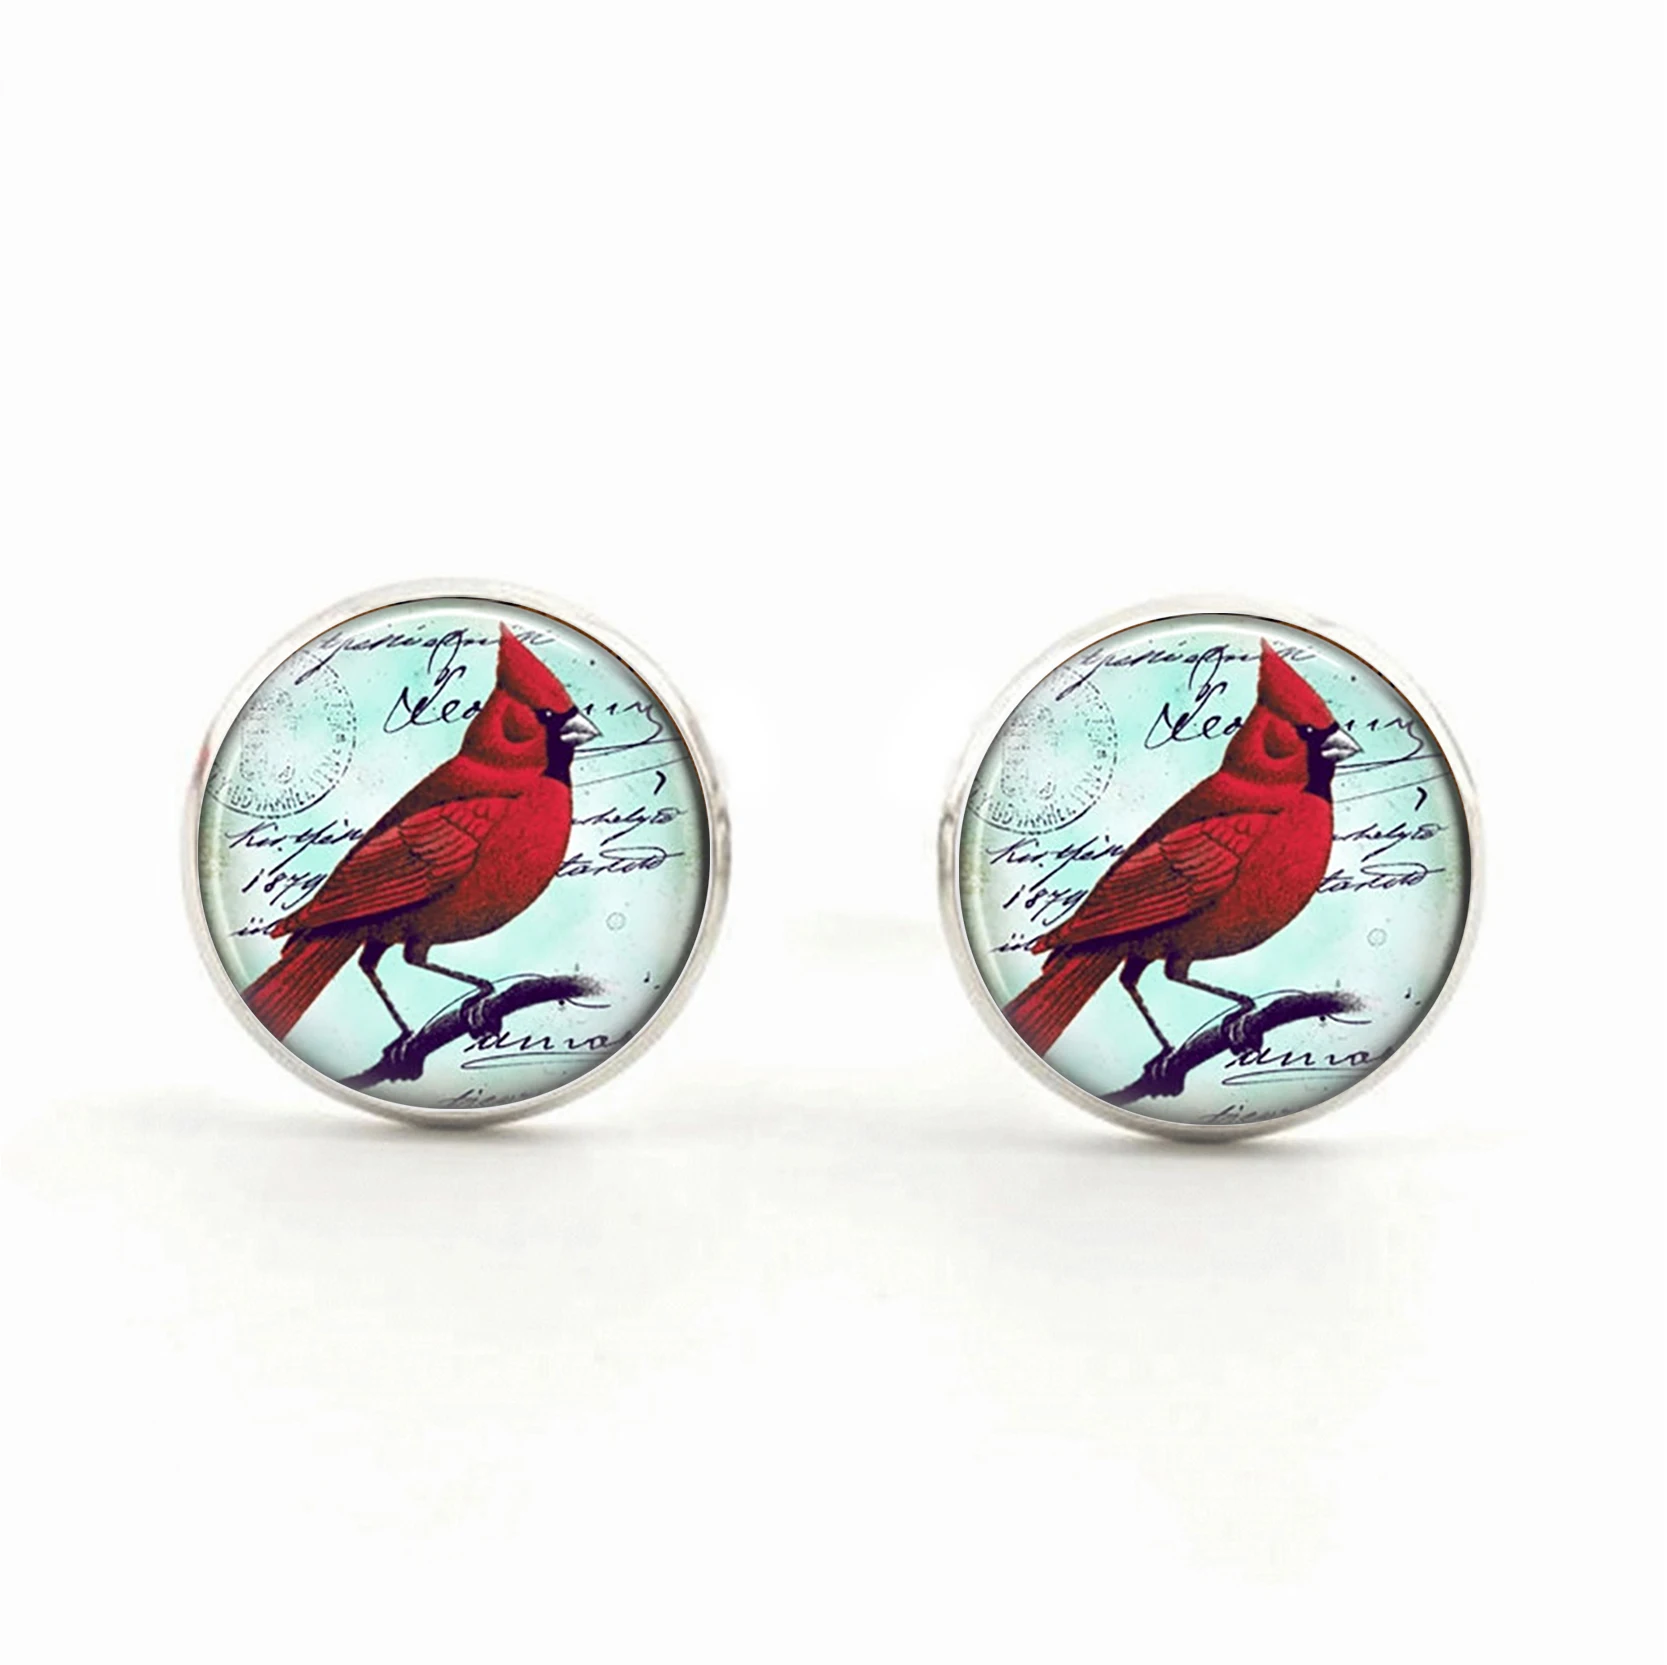 Red Parrot Jewelry Parrot Stud Earrings Cardinal Red Bird Stud Earrings Christmas Gift Plated Stud Earrings|bird earrings|stud earringsearrings christmas - AliExpress